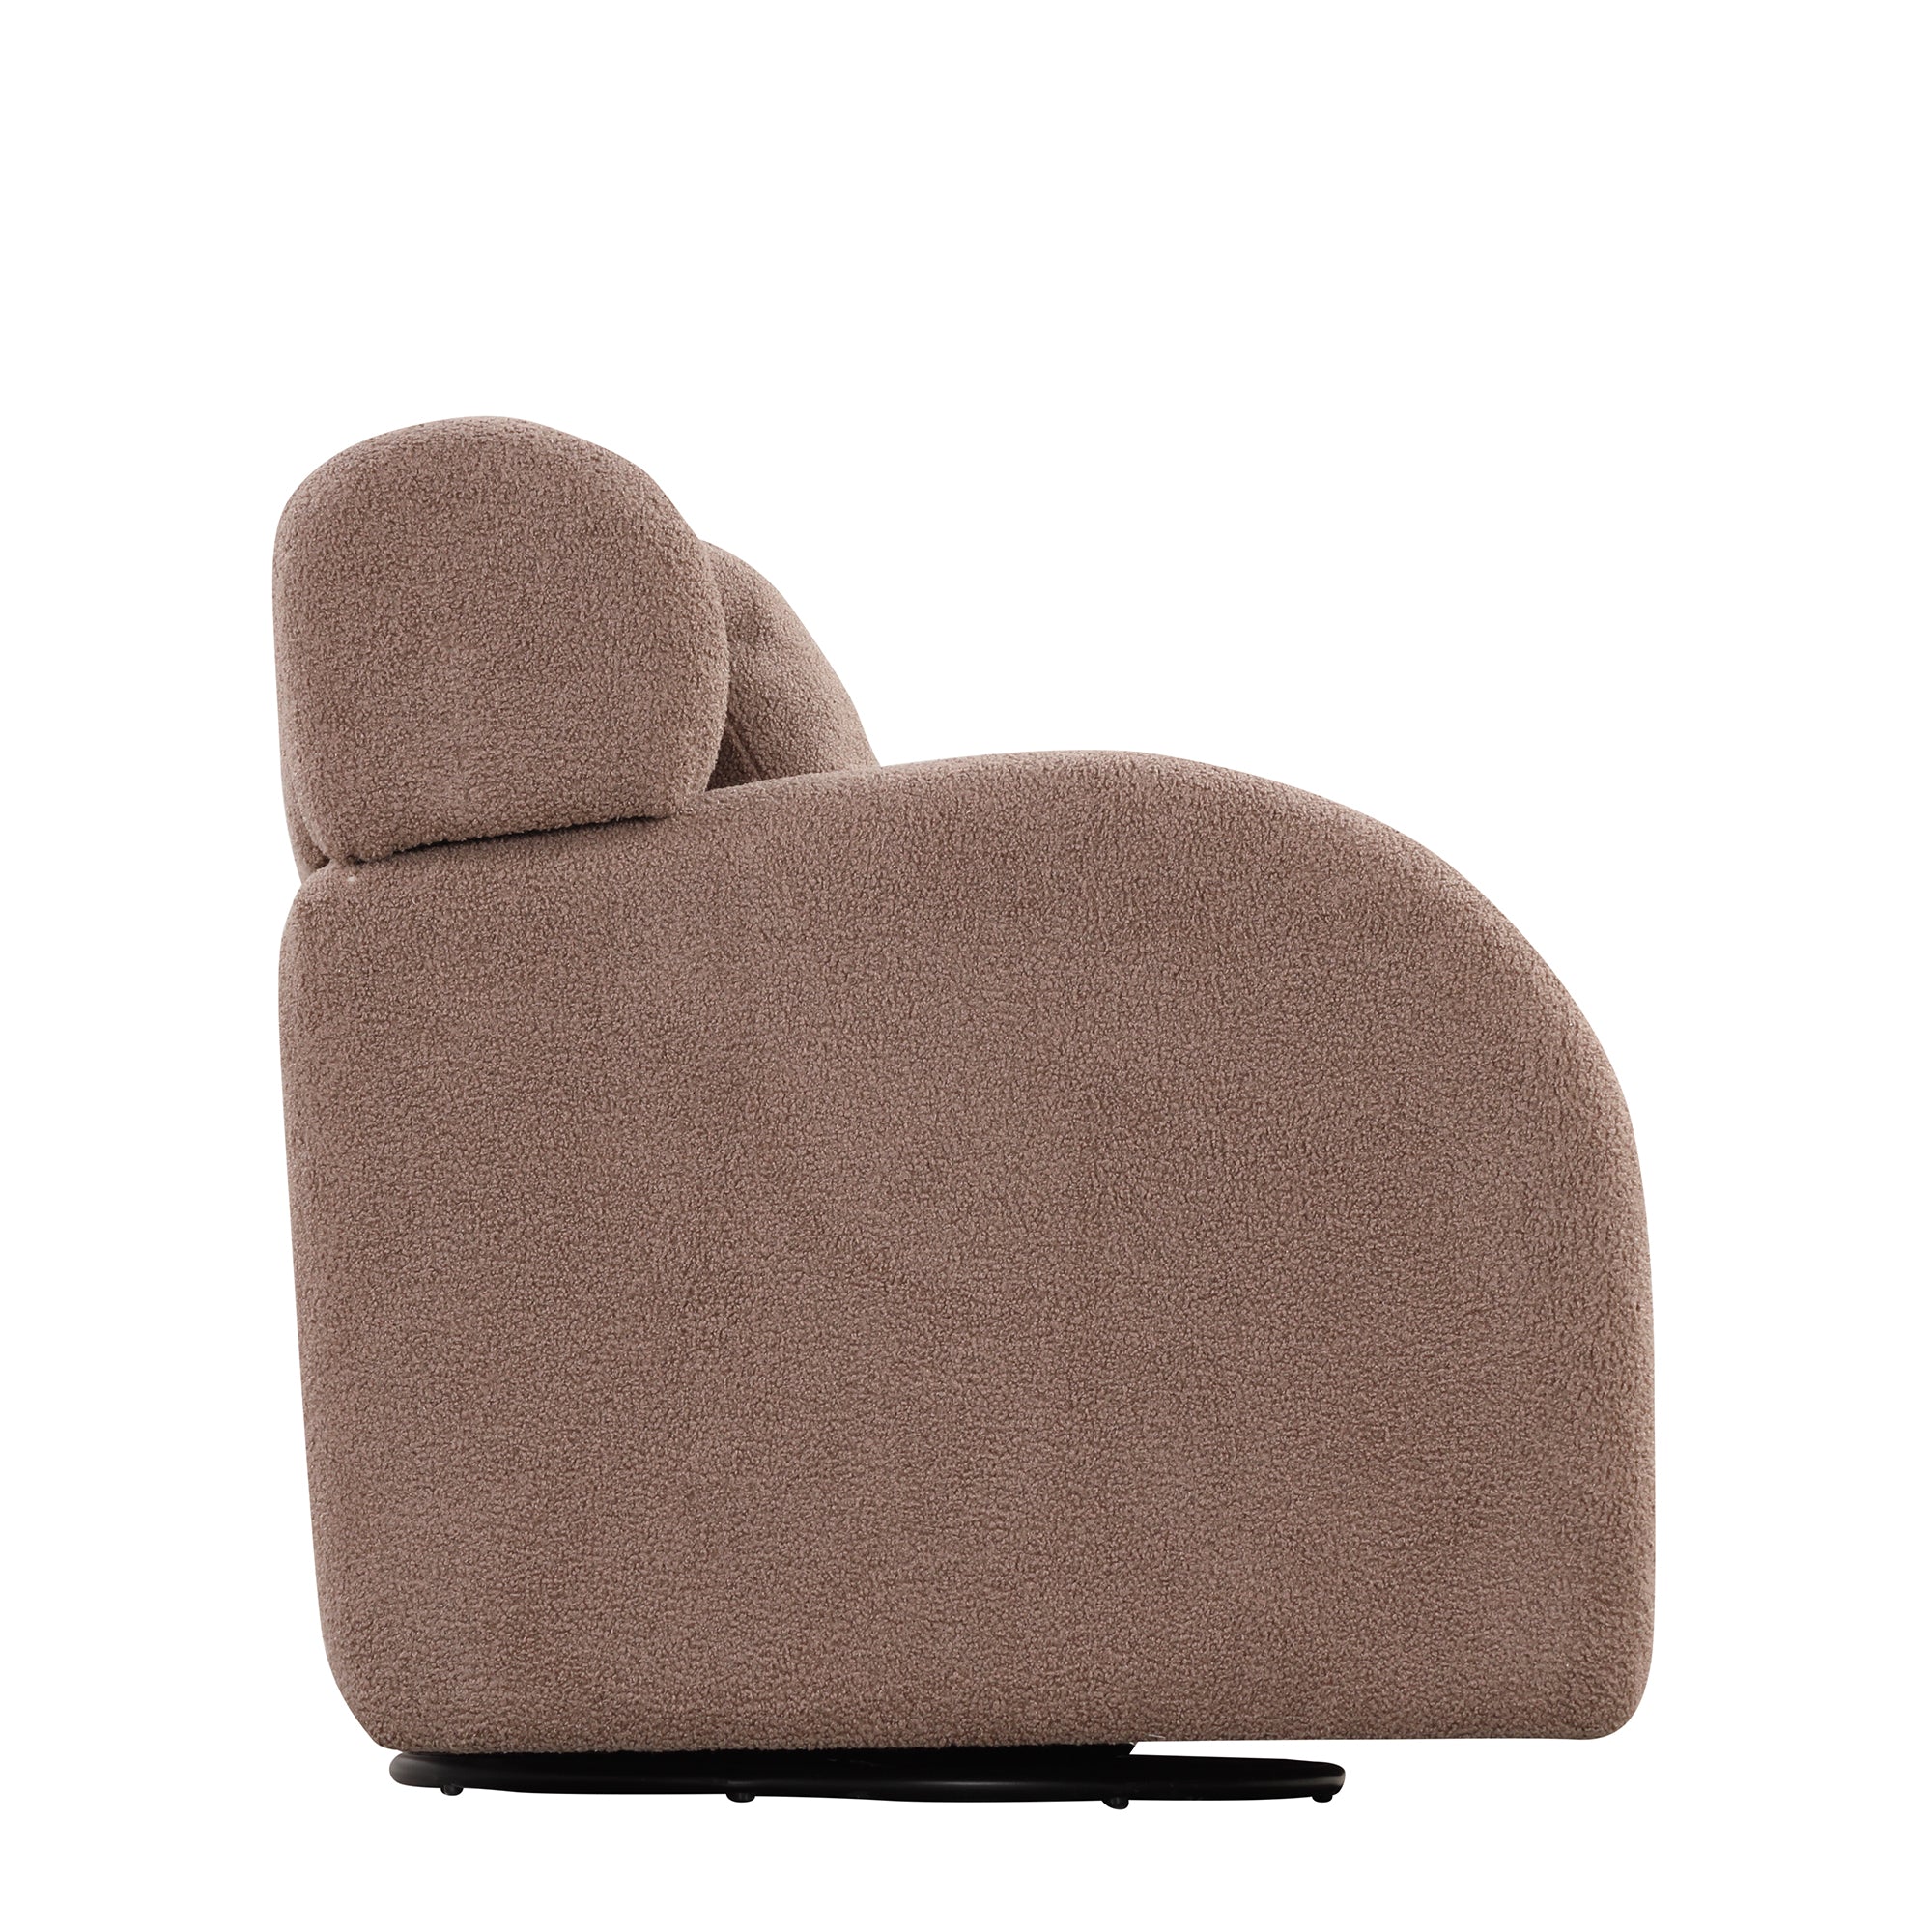 ZNTS Swivel Accent Chair with Ottoman, Teddy Short Plush Particle Velvet Armchair,360 Degree Swivel WF303390AAD